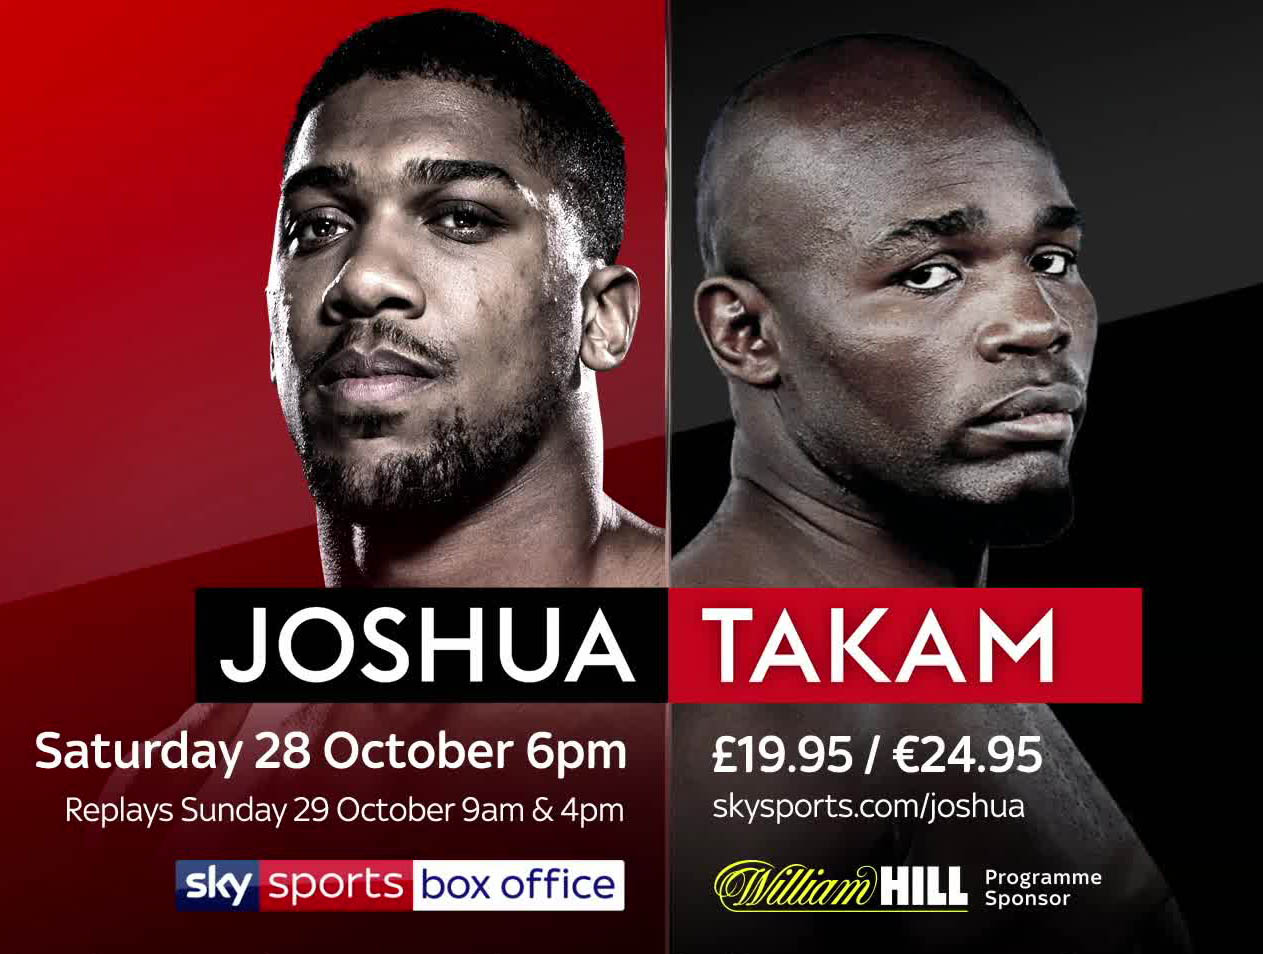 The Anthony Joshua fight can be Watched in local Vue cinemas